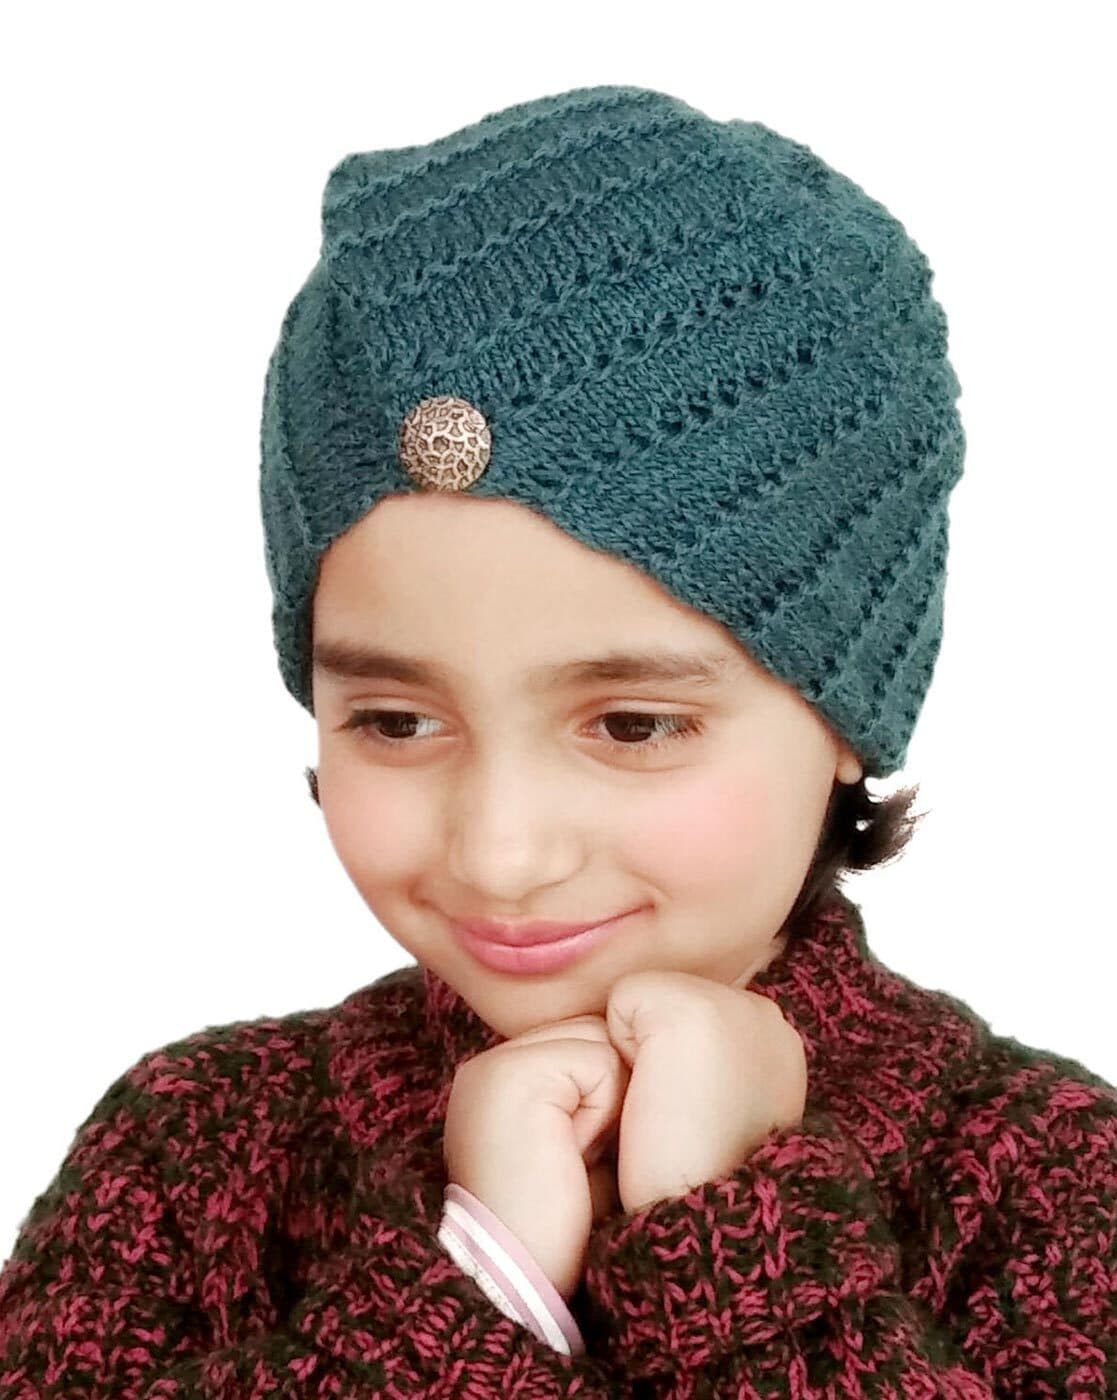 Bharatasya Knitted Winter Slouchy Boho Cap and Scarf in Monogram pattern in  Soft Acrylic Wool Blend